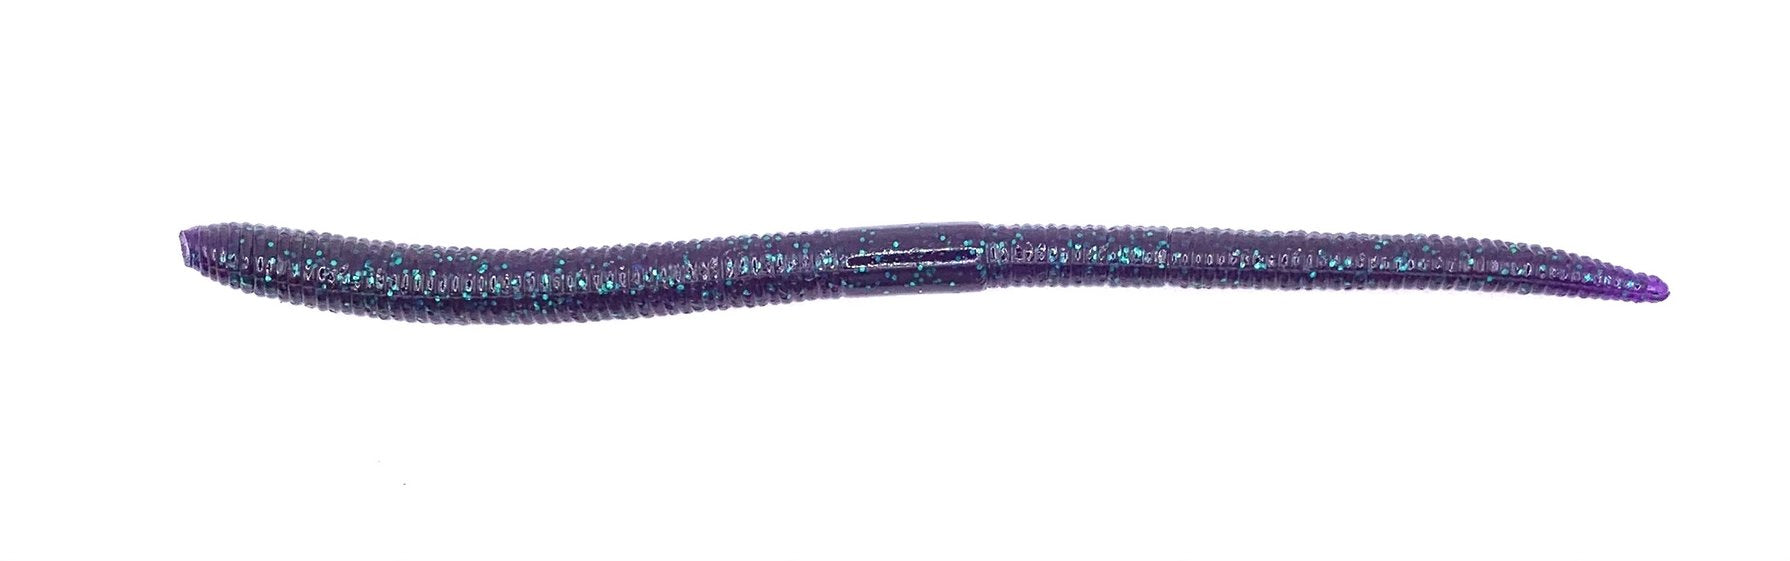 Jackall Flick-Shake Worms 6.8 – Clearlake Bait & Tackle